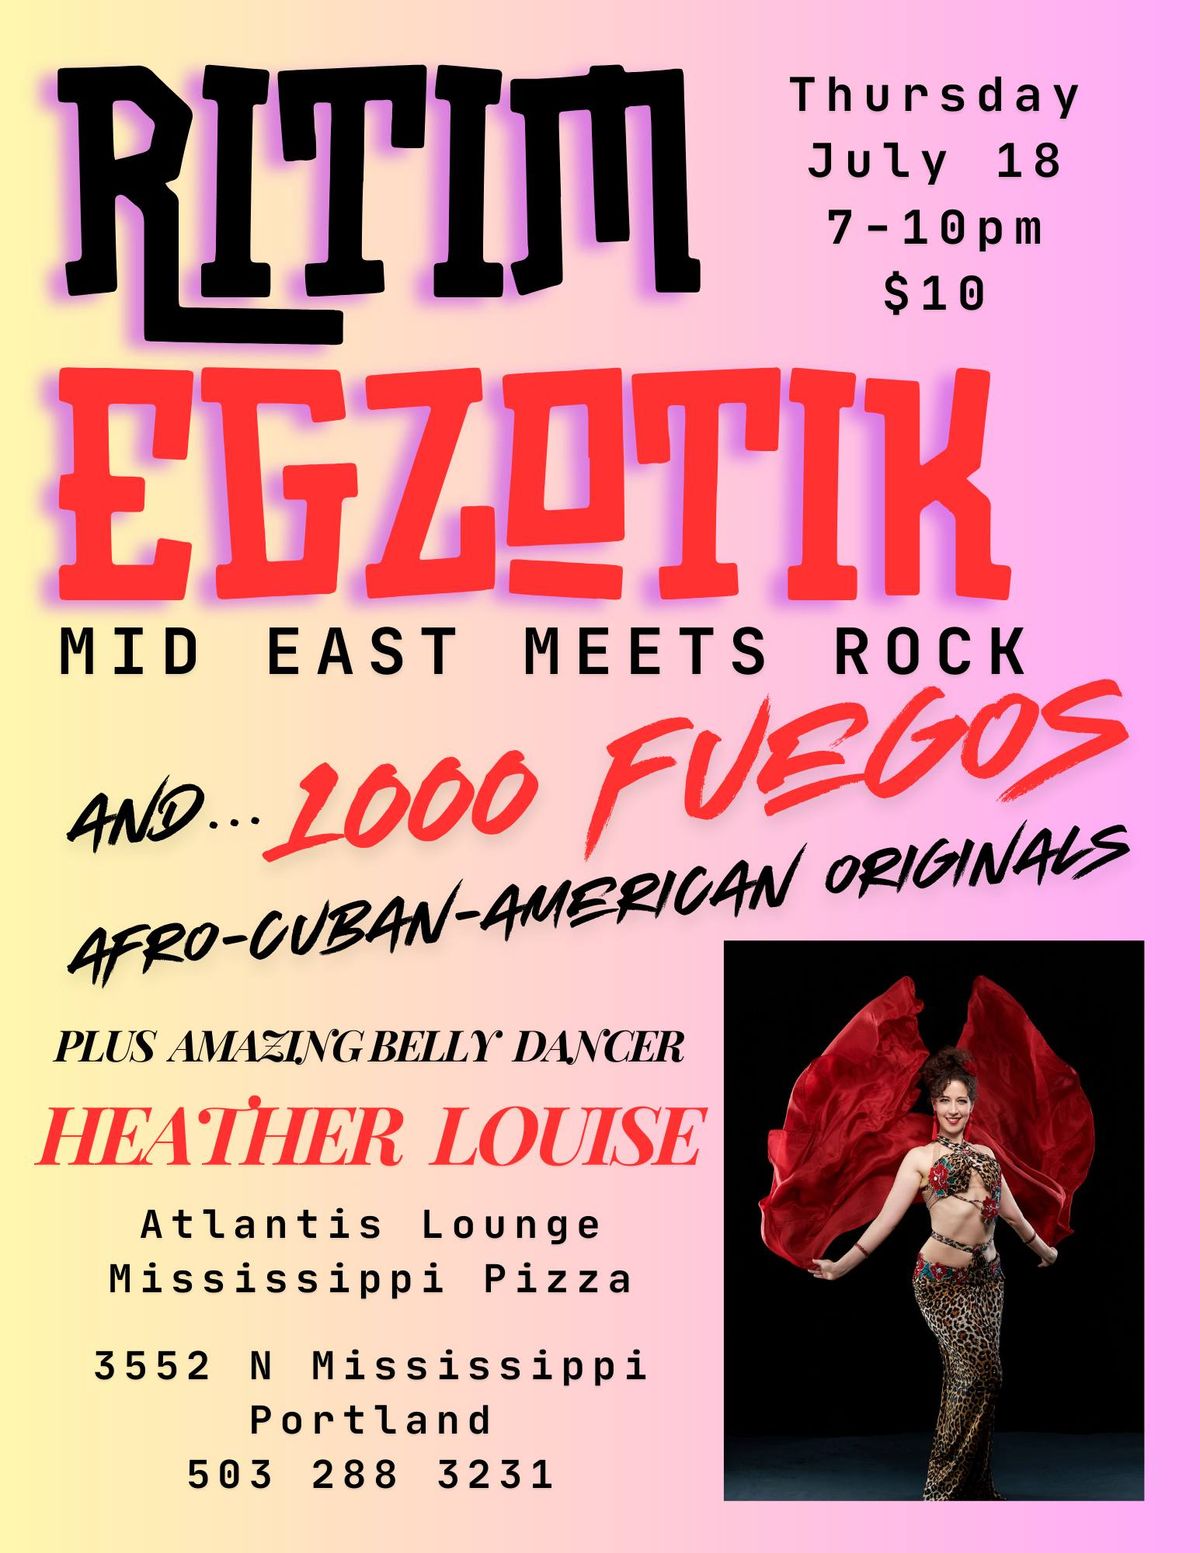 The Return of Ritm Egzotik with 1000 Fuegos!